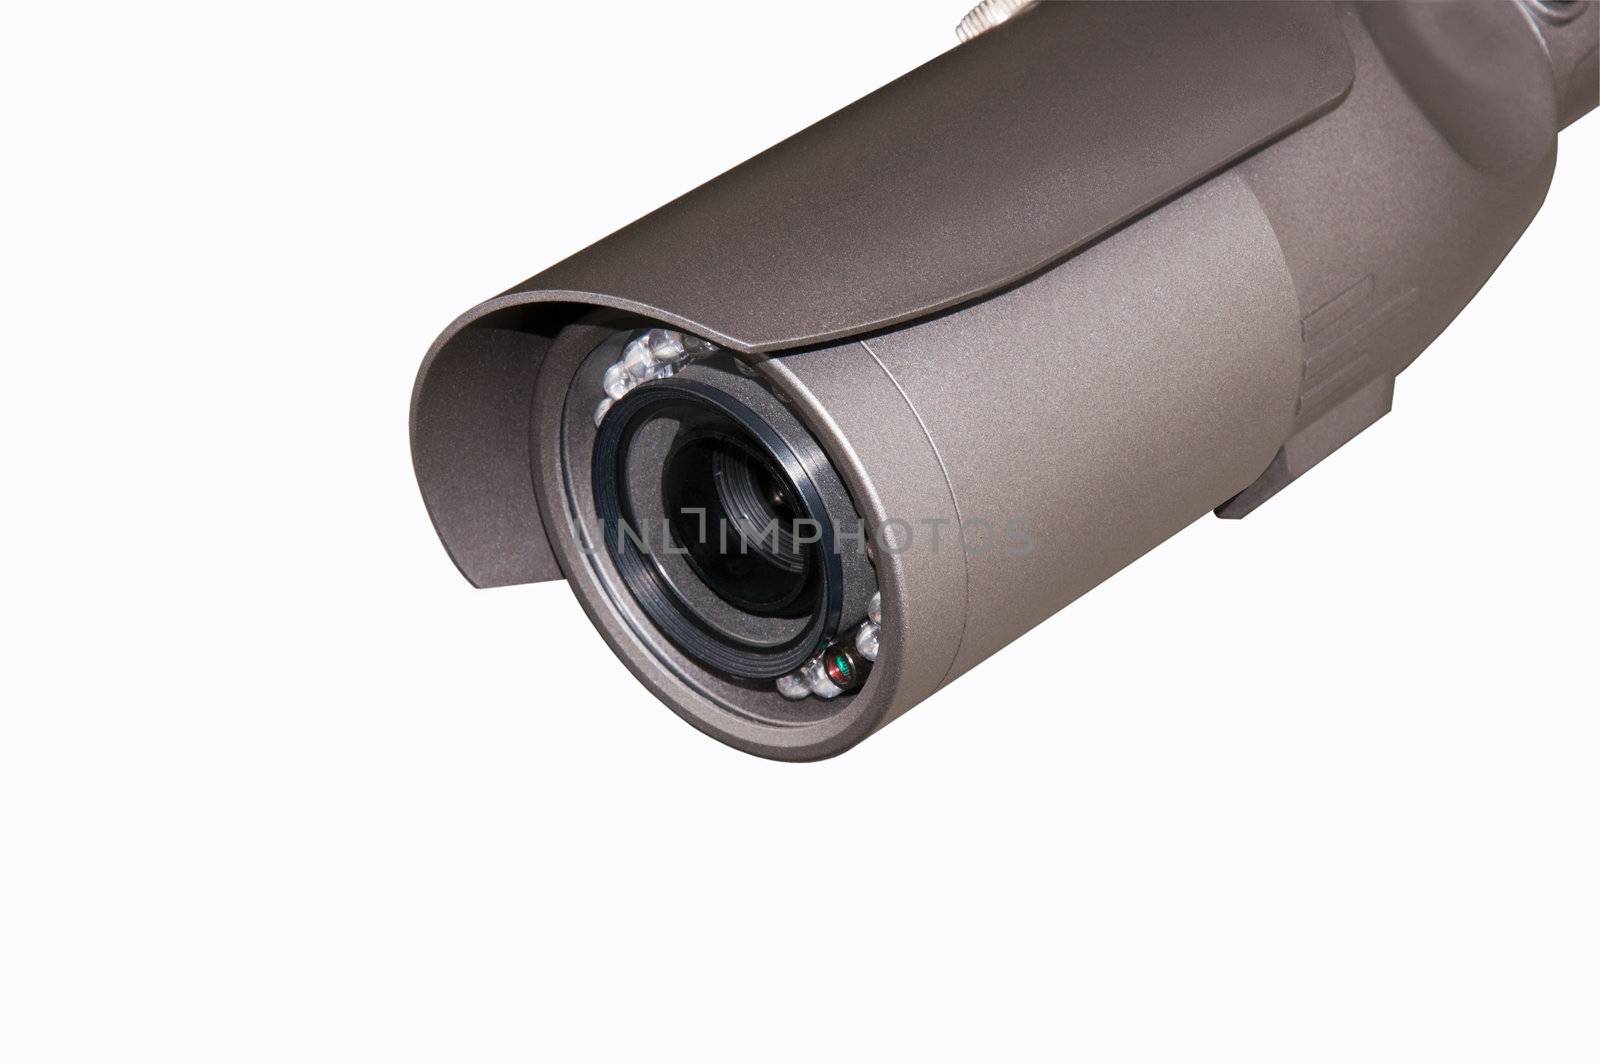 A surveillance camera for monitoring and protection of various objects.